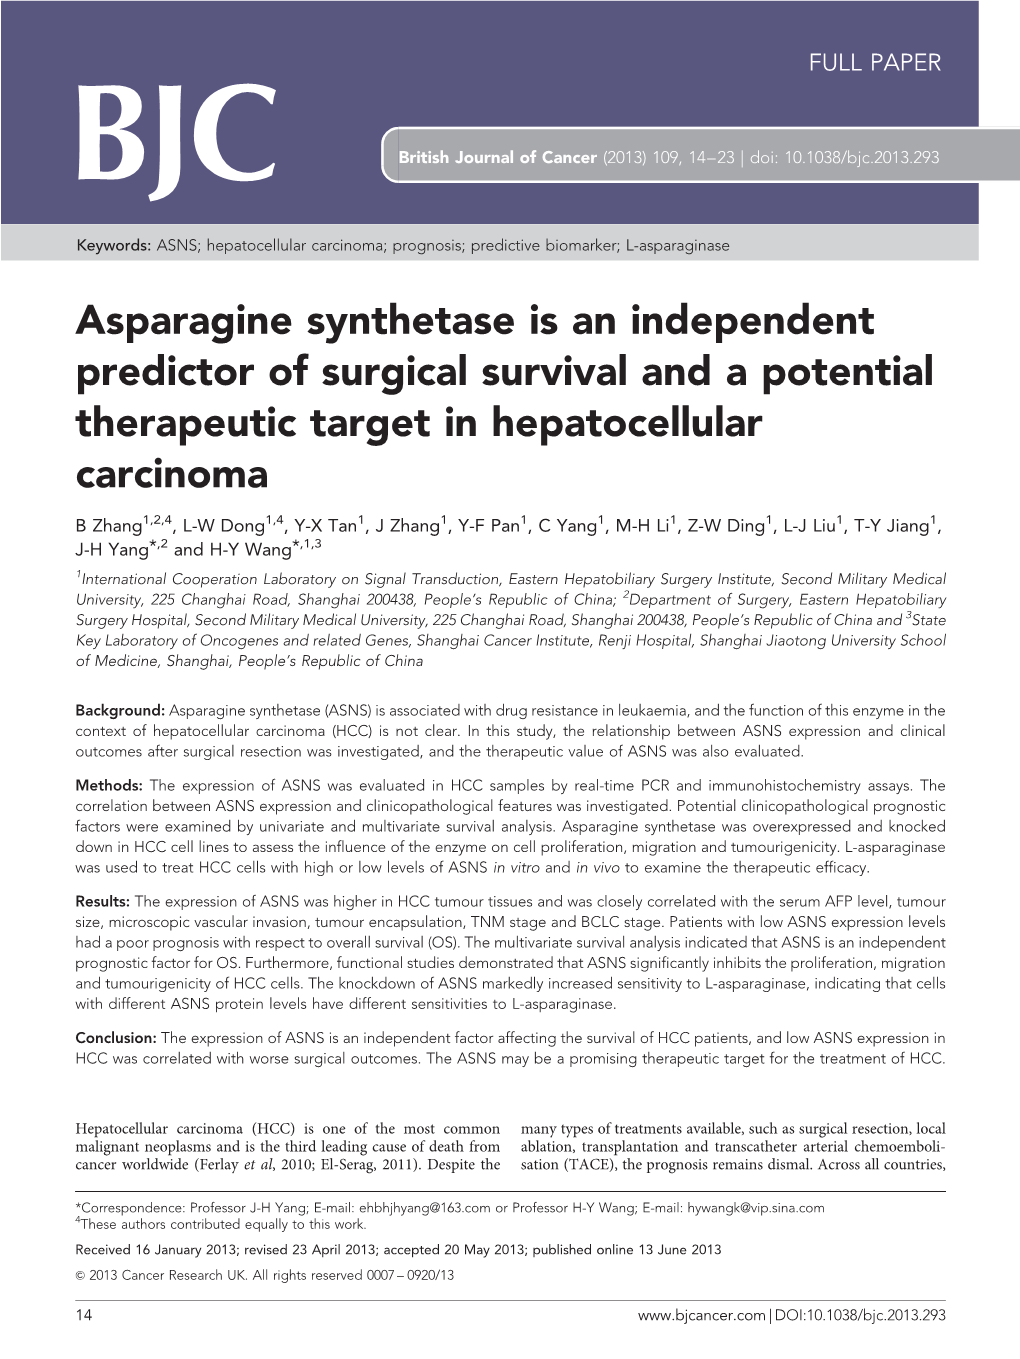 Asparagine Synthetase Is an Independent Predictor of Surgical Survival and a Potential Therapeutic Target in Hepatocellular Carcinoma